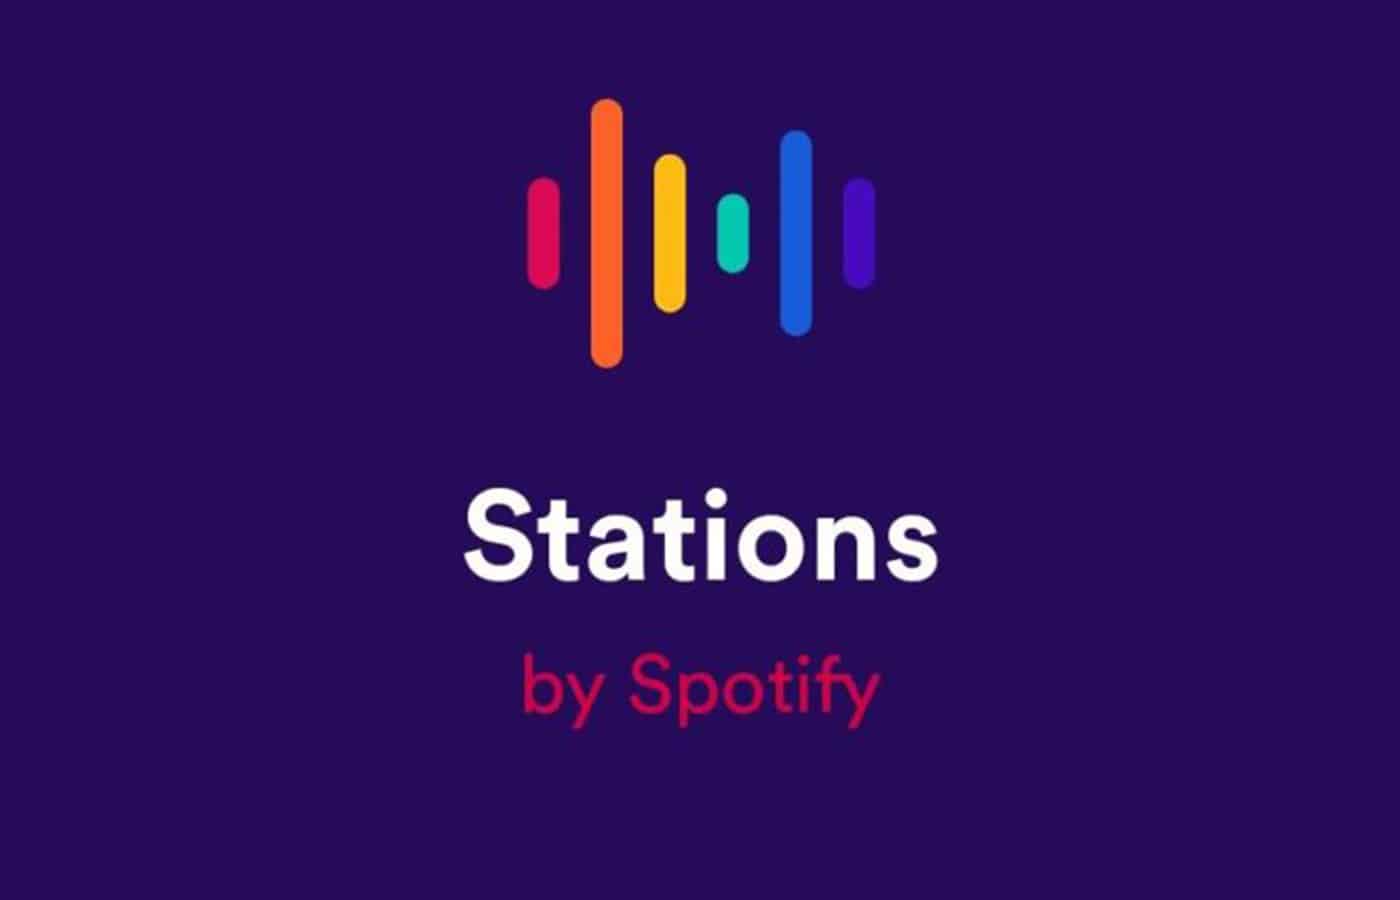 Spotify Stations sous iOS